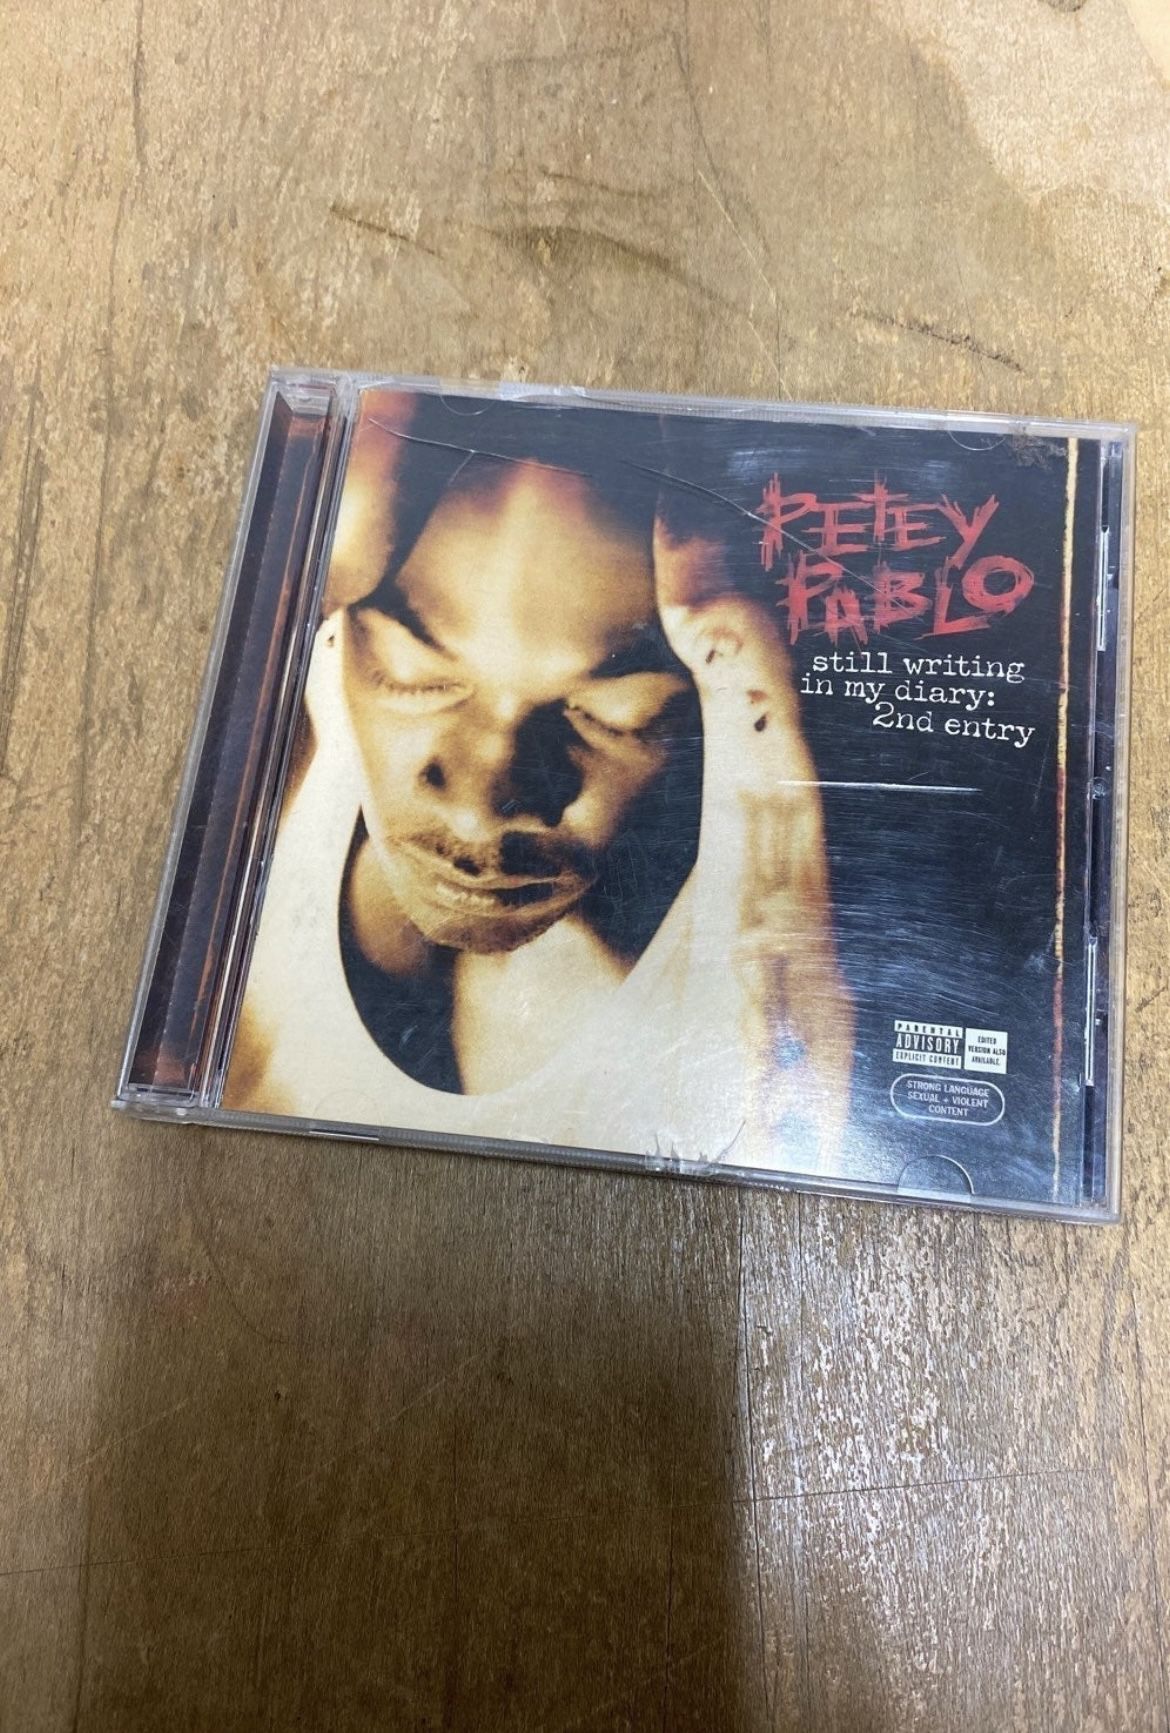 Petey Pablo Still Writing In My Diary: 2nd Entry CD Young Buck North Carolina NC